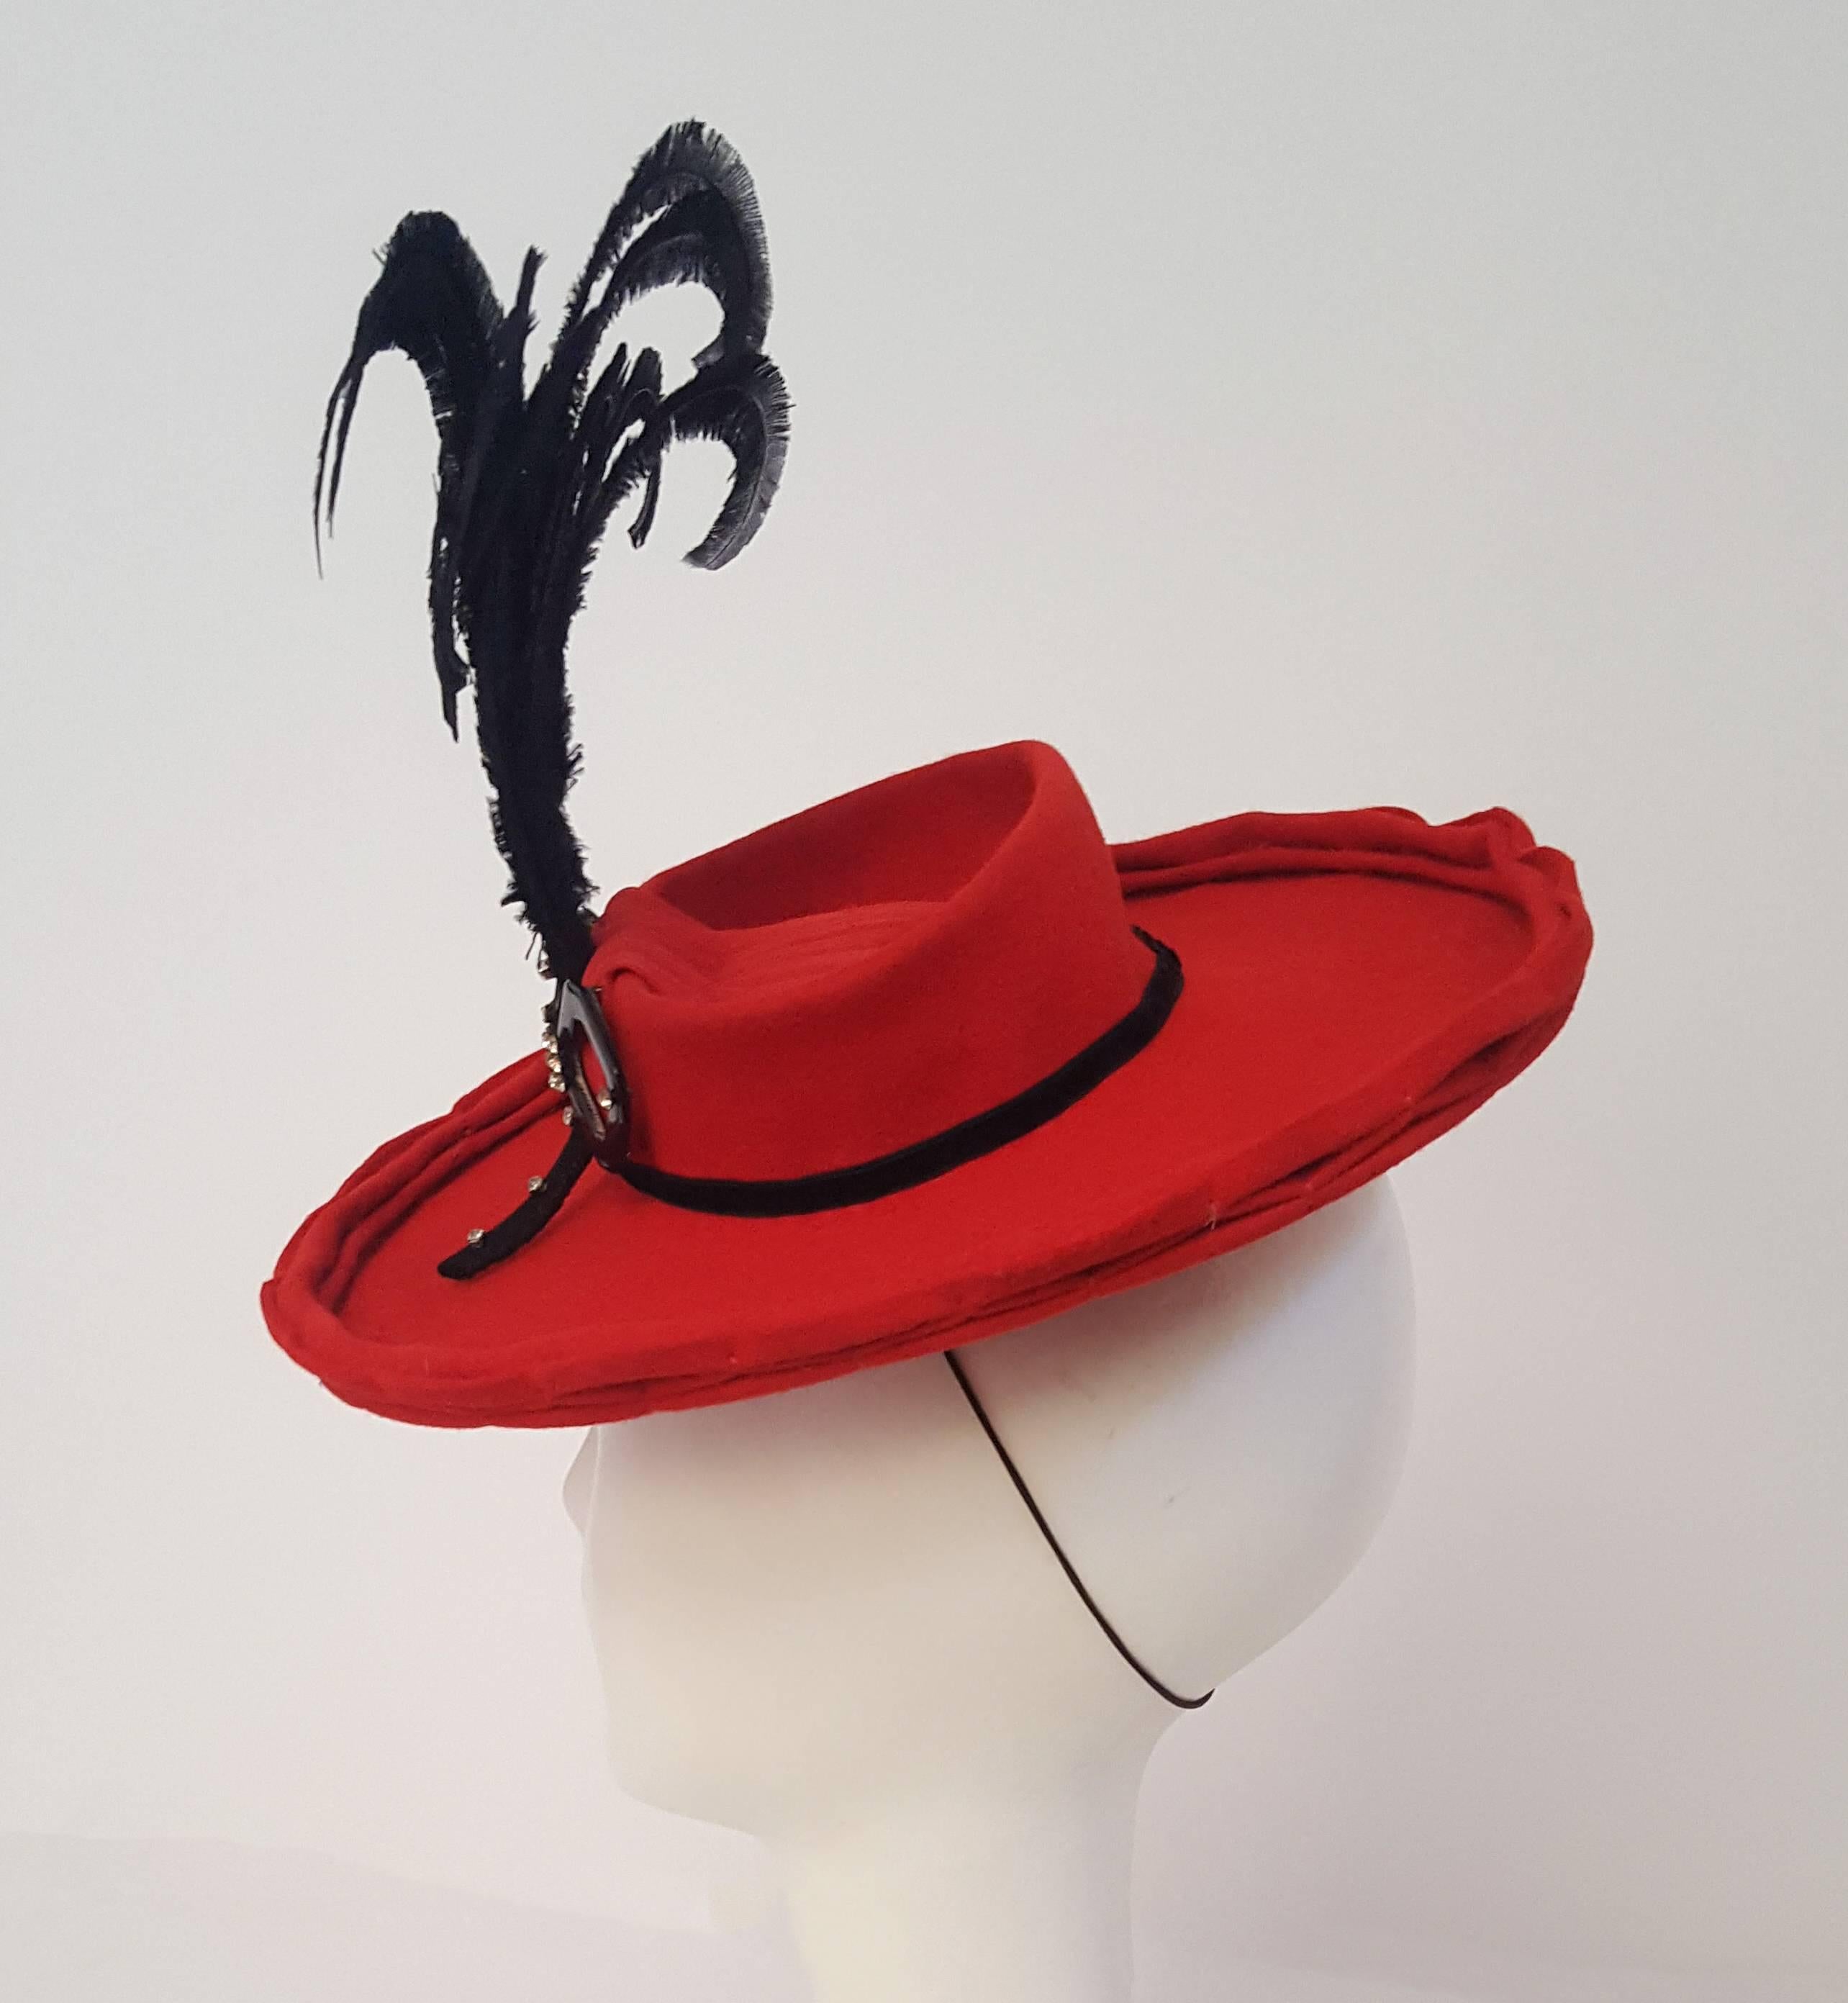 Women's 40s Red Felt Toy Fashion Hat with Hand Curled Feathers 